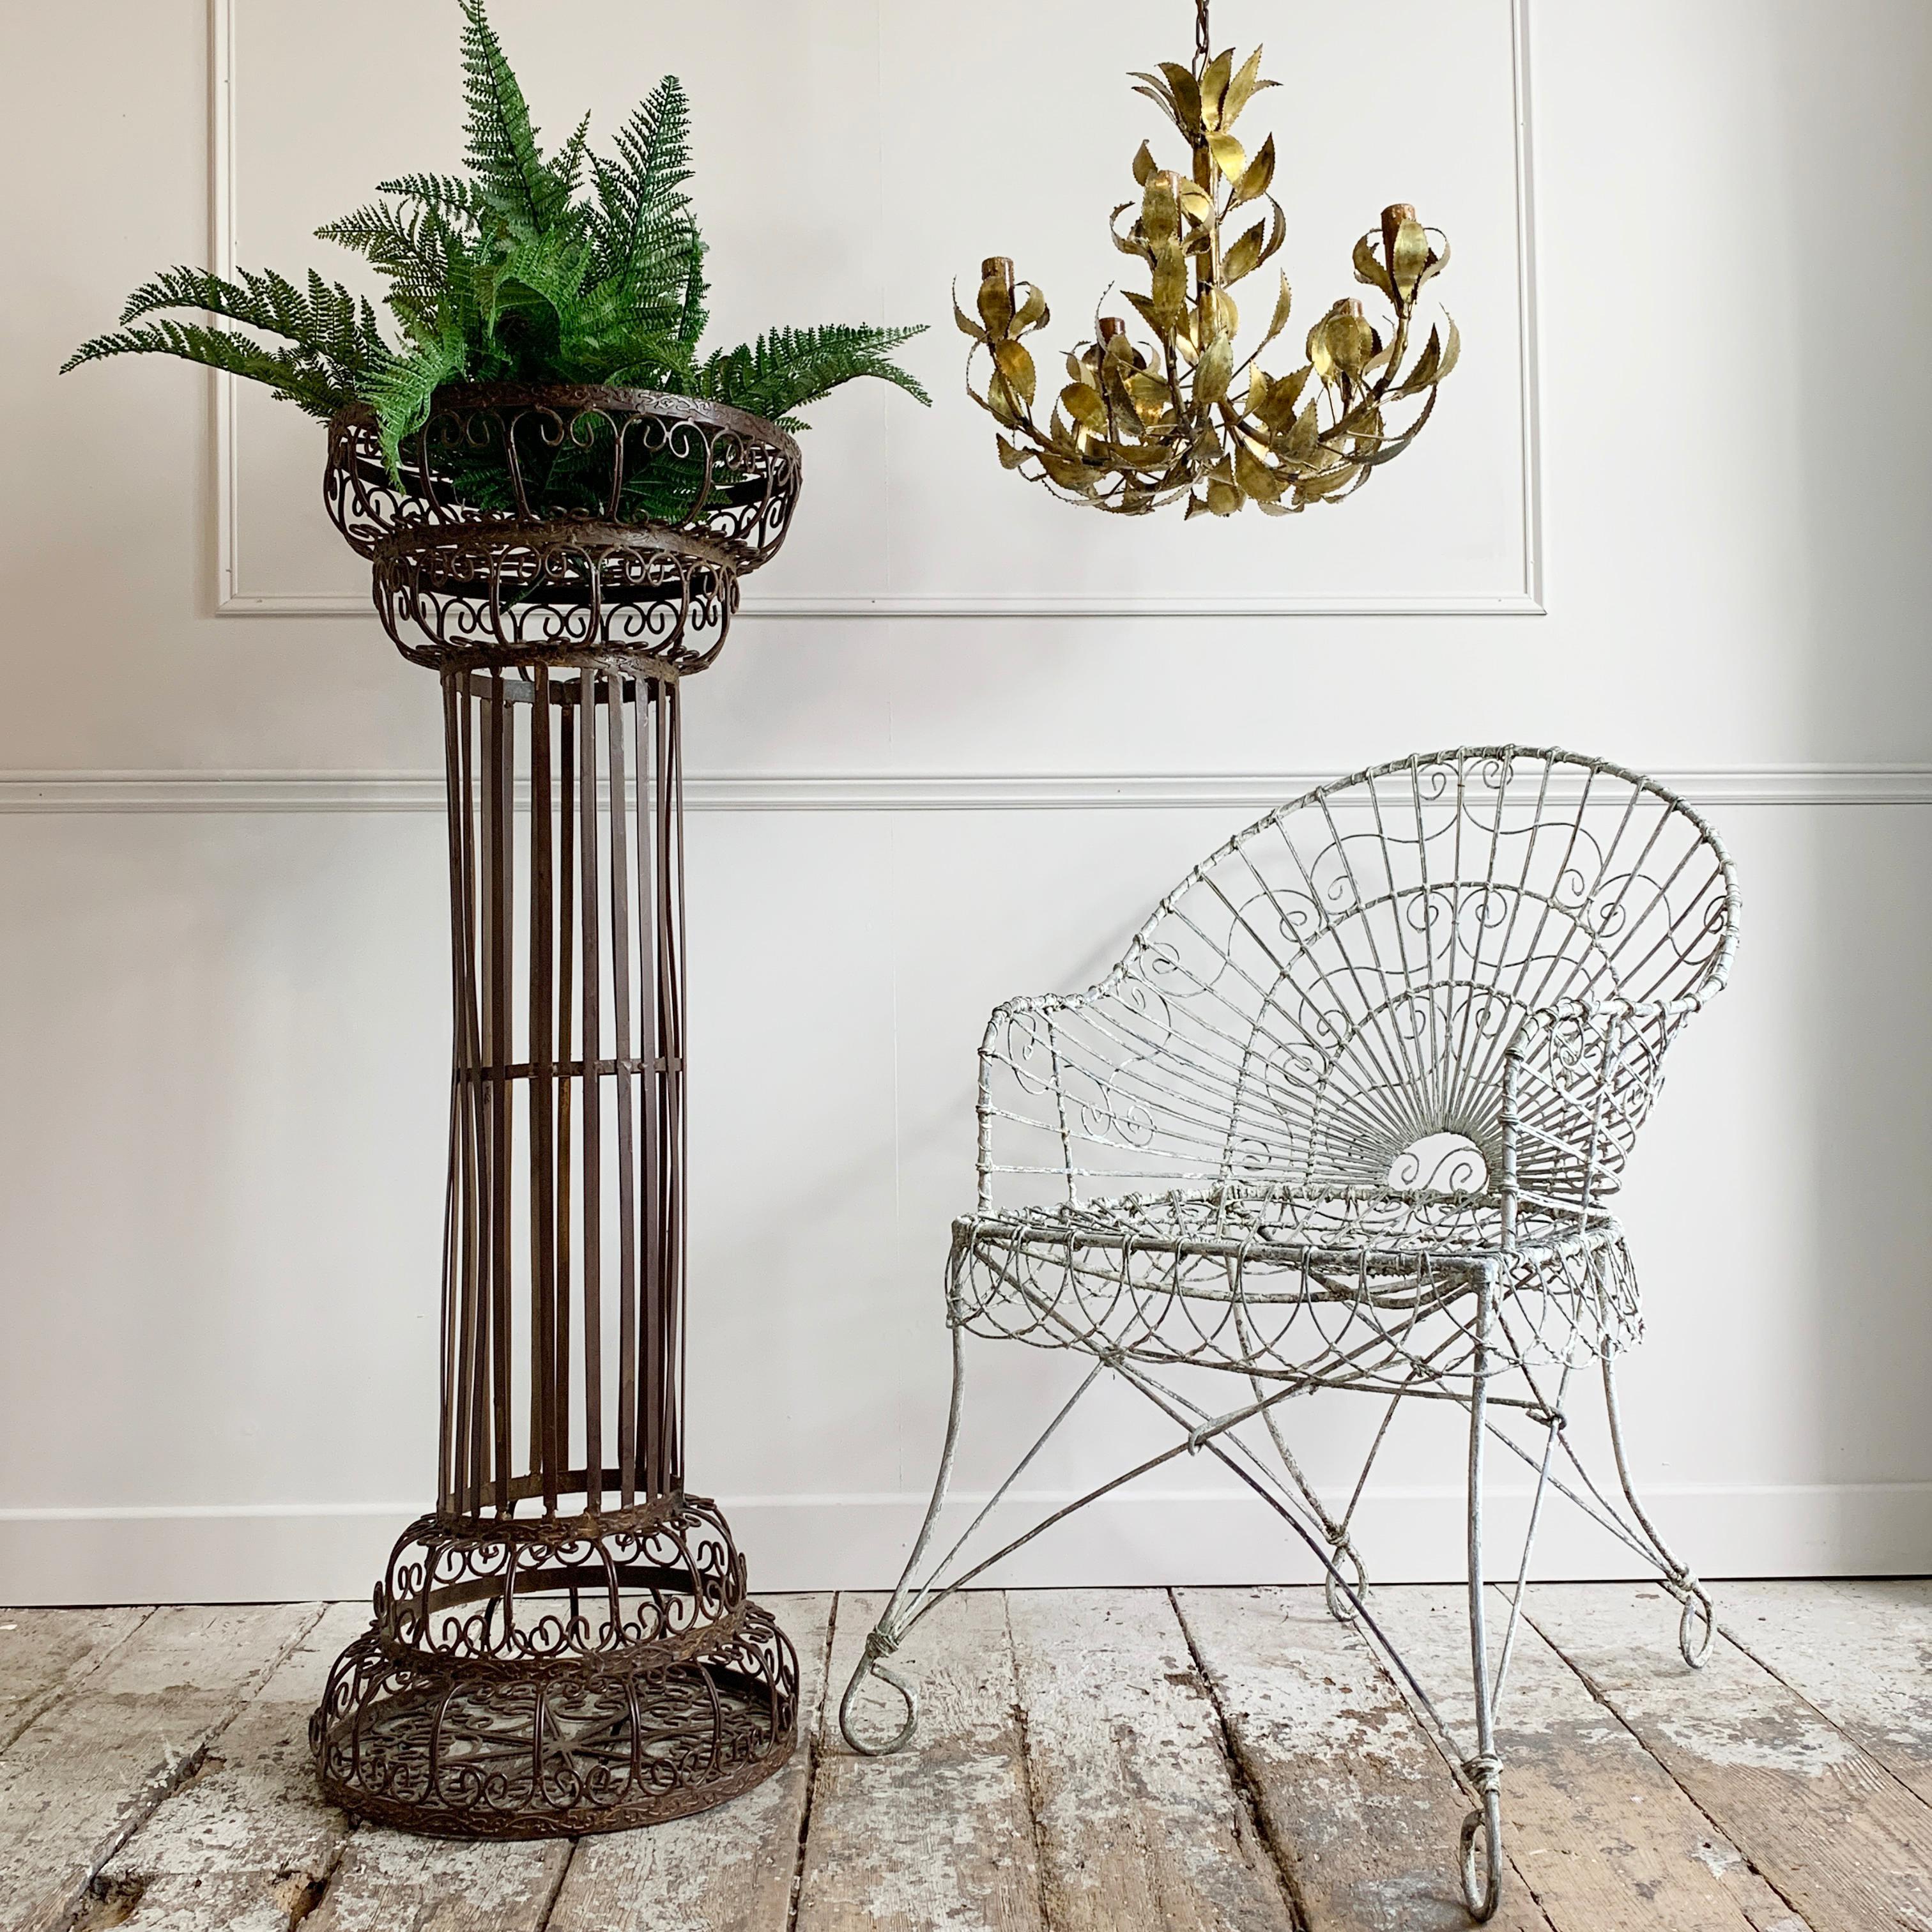 Mid Century, Decorative Scrollwork Plant Stand For Sale at 1stDibs